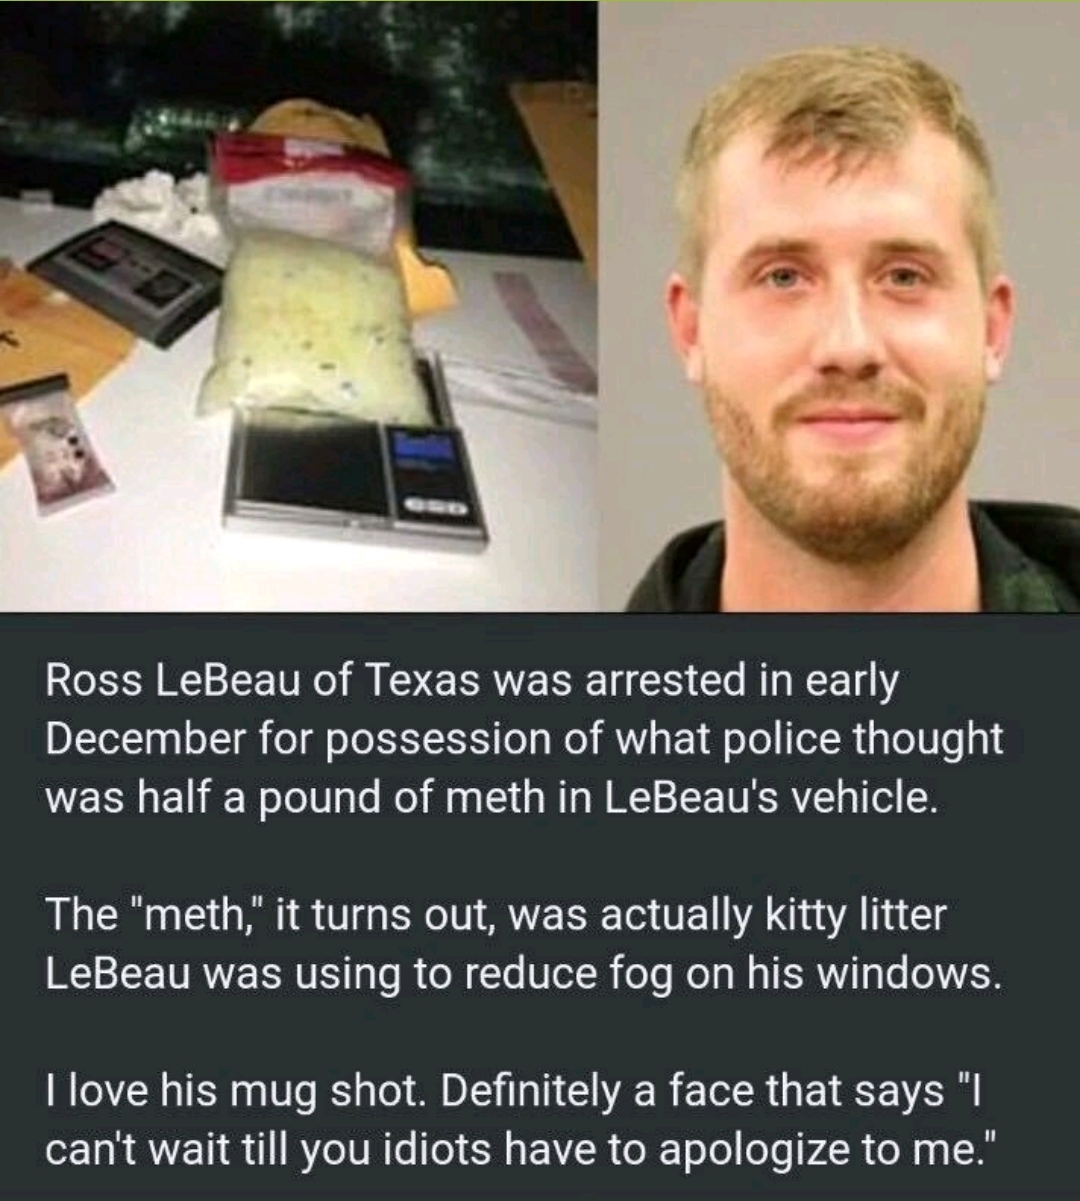 memes - man arrested for cat litter - Ross LeBeau of Texas was arrested in early December for possession of what police thought was half a pound of meth in LeBeau's vehicle. The "meth," it turns out, was actually kitty litter LeBeau was using to reduce fo